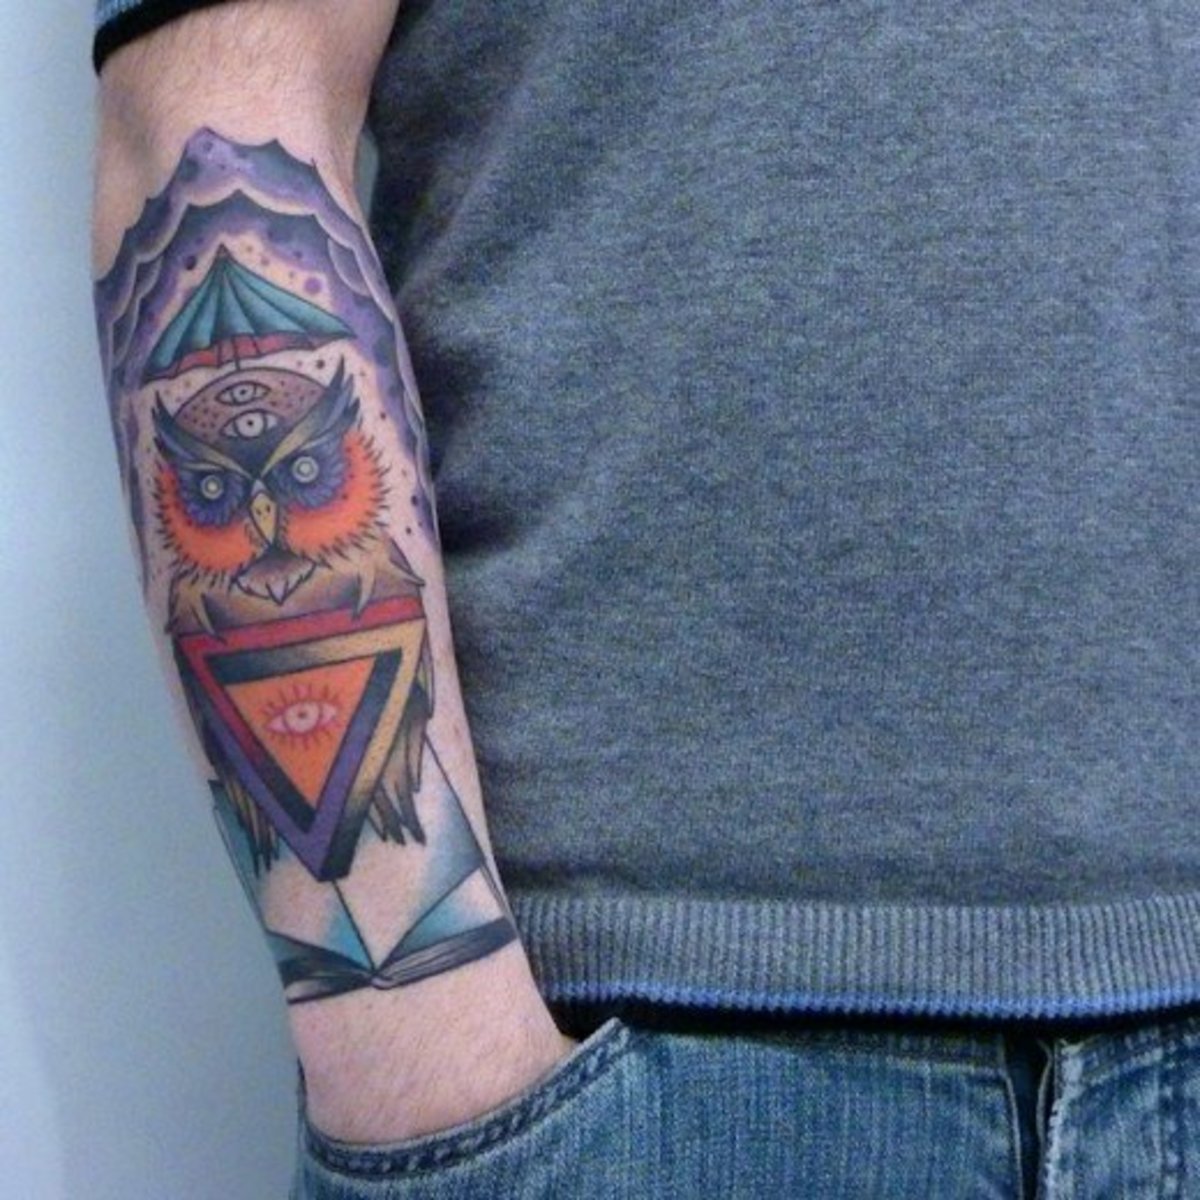 An owl tattoo that incorporates storm clouds, an umbrella, and a book.